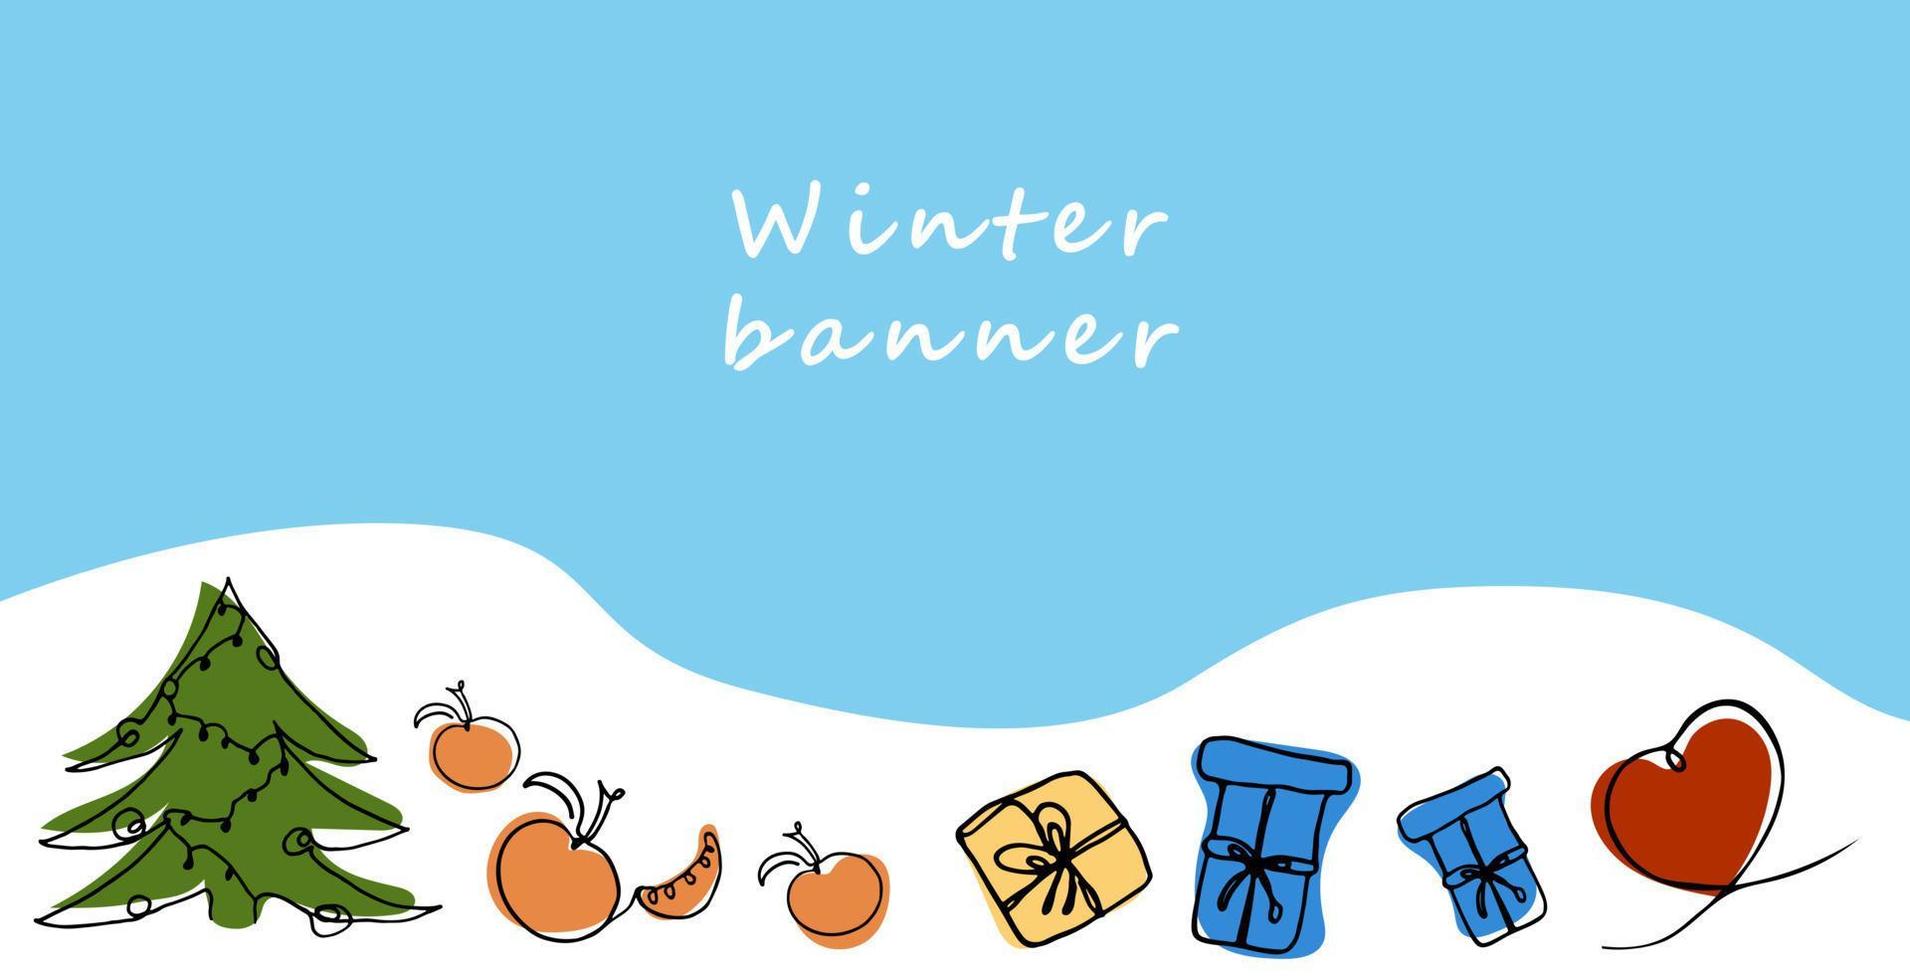 Winter web banner blue and white. With snowdrifts and place for text. Vector illustration. Colored doodle elements of Christmas tree, gift, tangerine and heart.